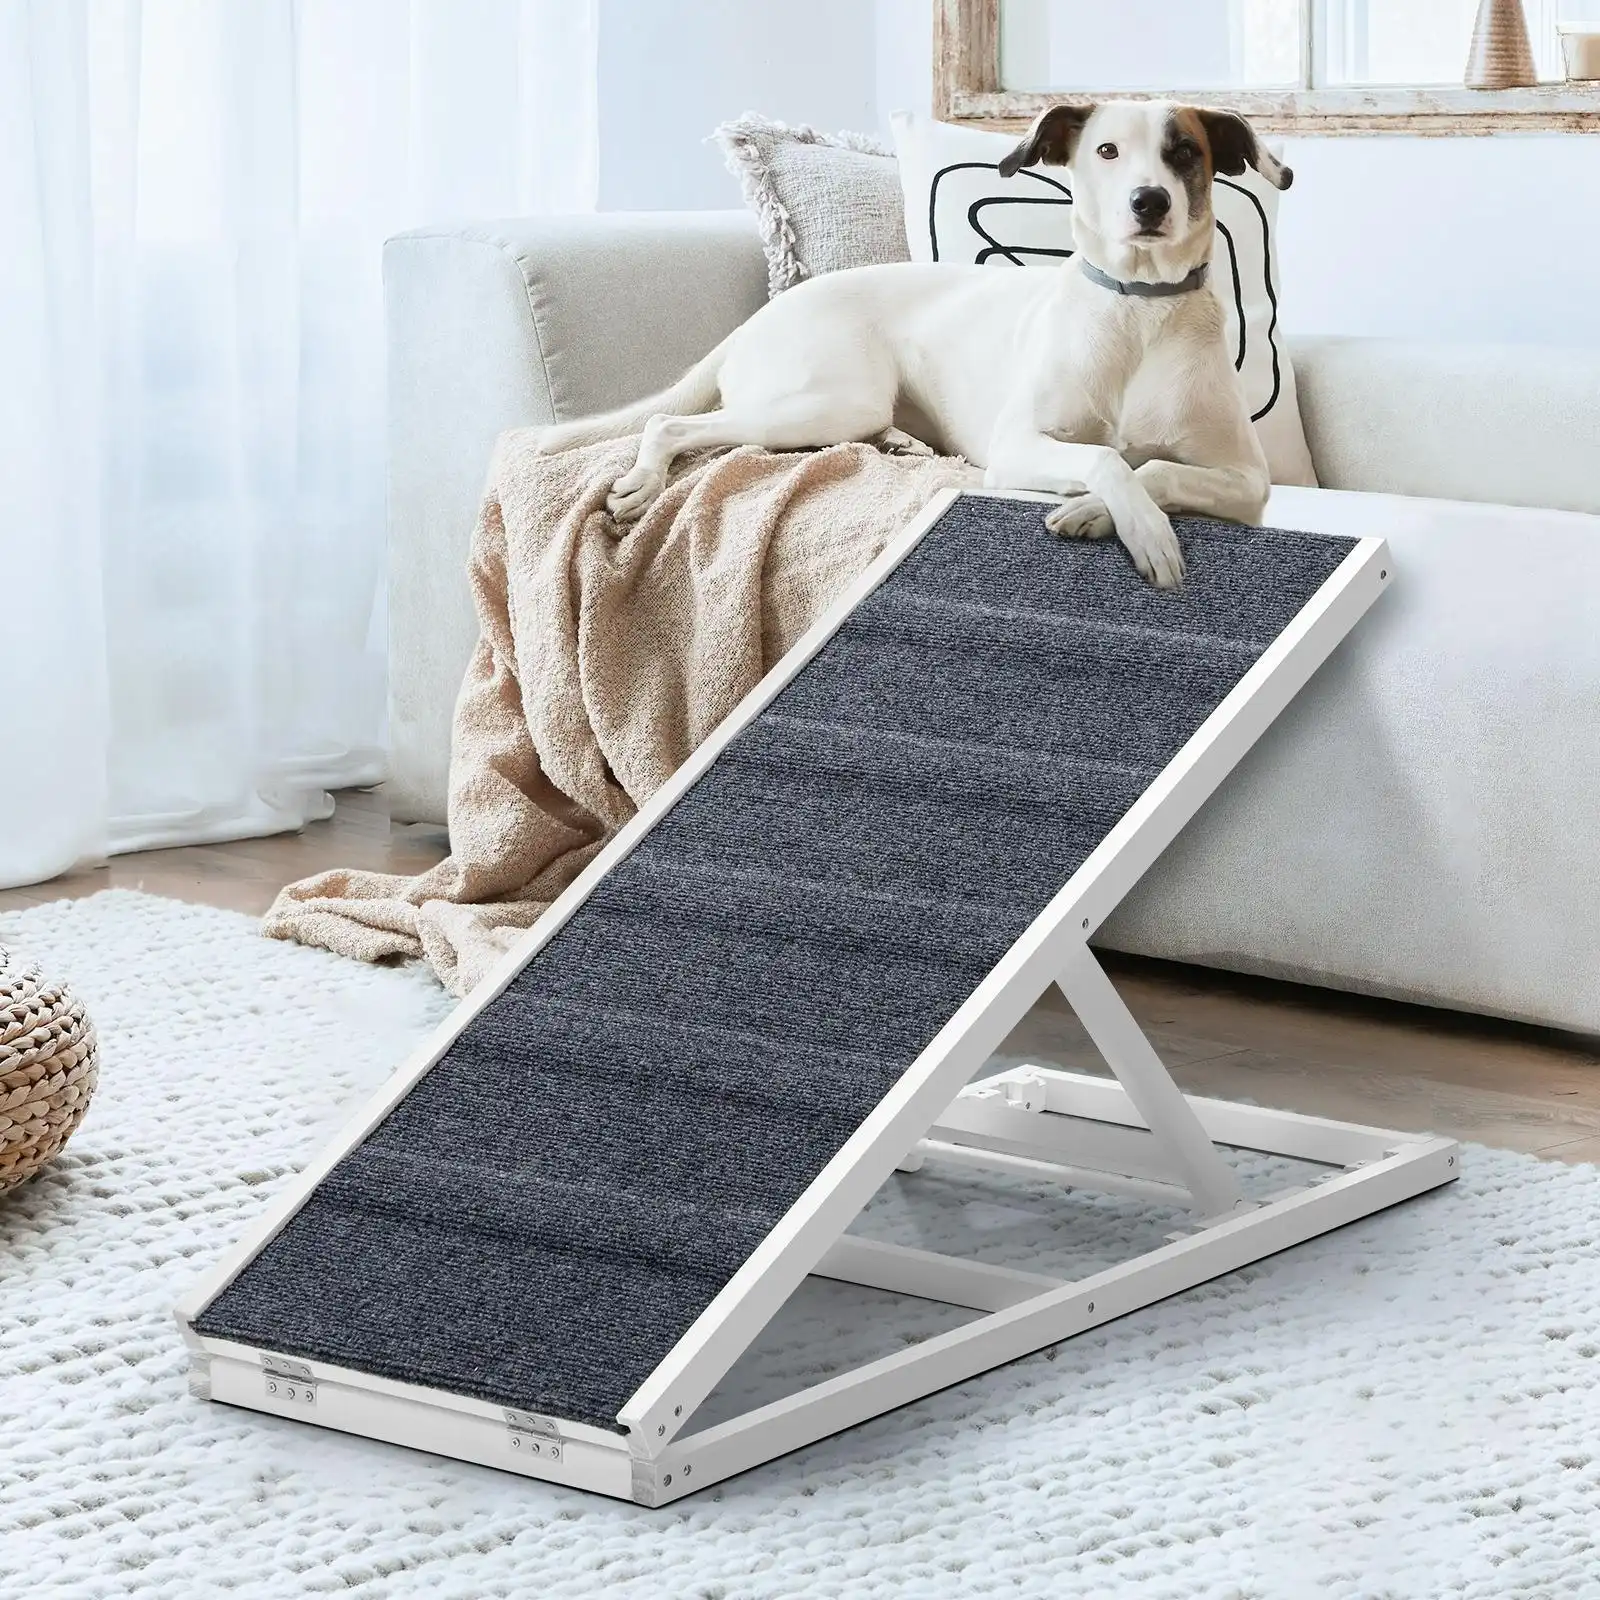 Alopet Dog Pet Ramp Adjustable Height Stairs Bed Sofa Car Foldable 100cm White